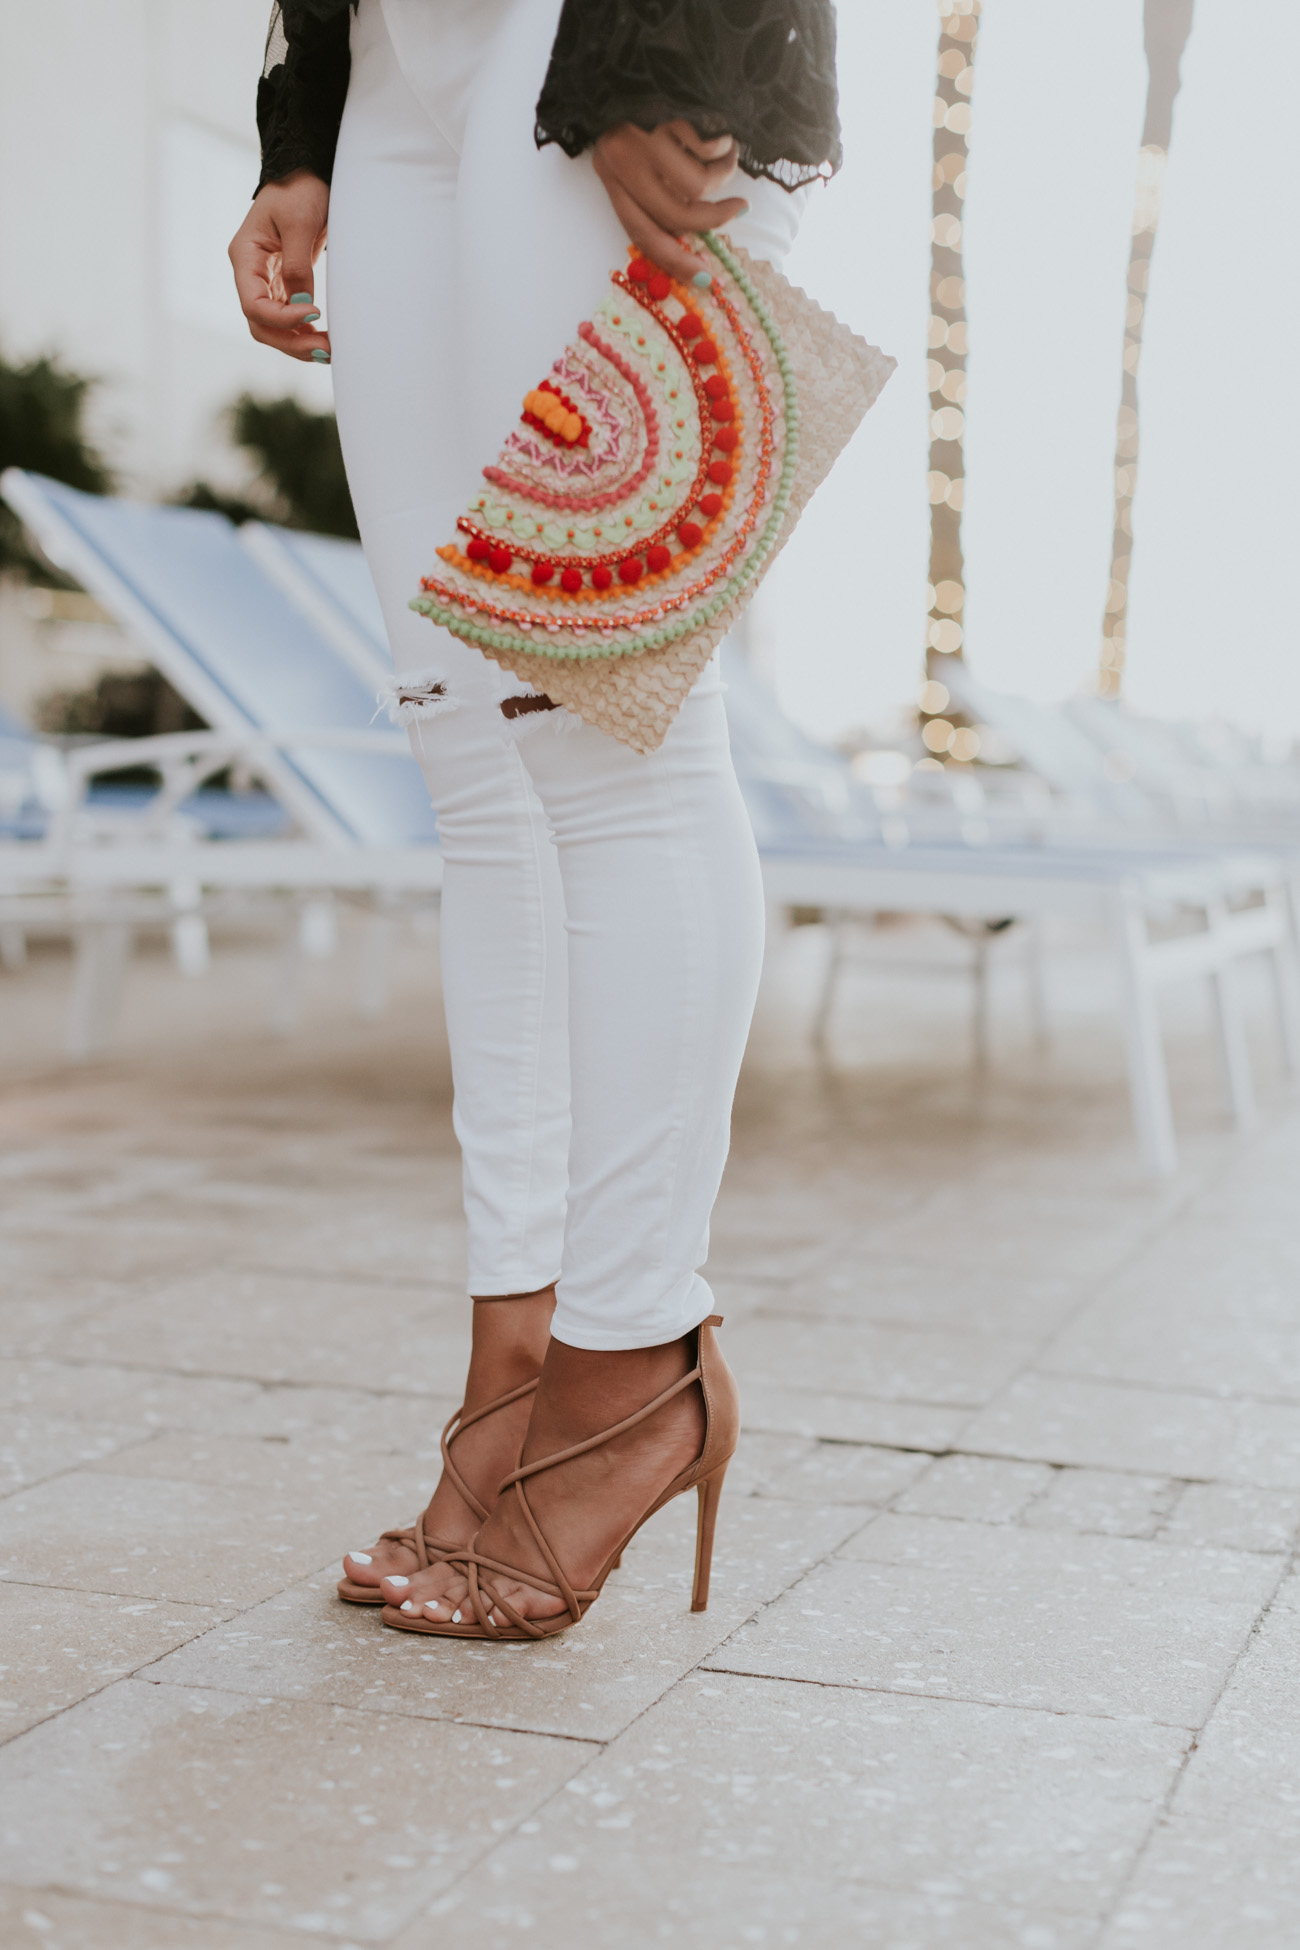 ruffle top, off the shoulder top, endless rose top, off the shoulder ruffle top, mystique clutch, strappy sandals, beach style, beach outfit, vacation outfit, vacation style, turquoise tassel earrings // grace wainwright a southern drawl